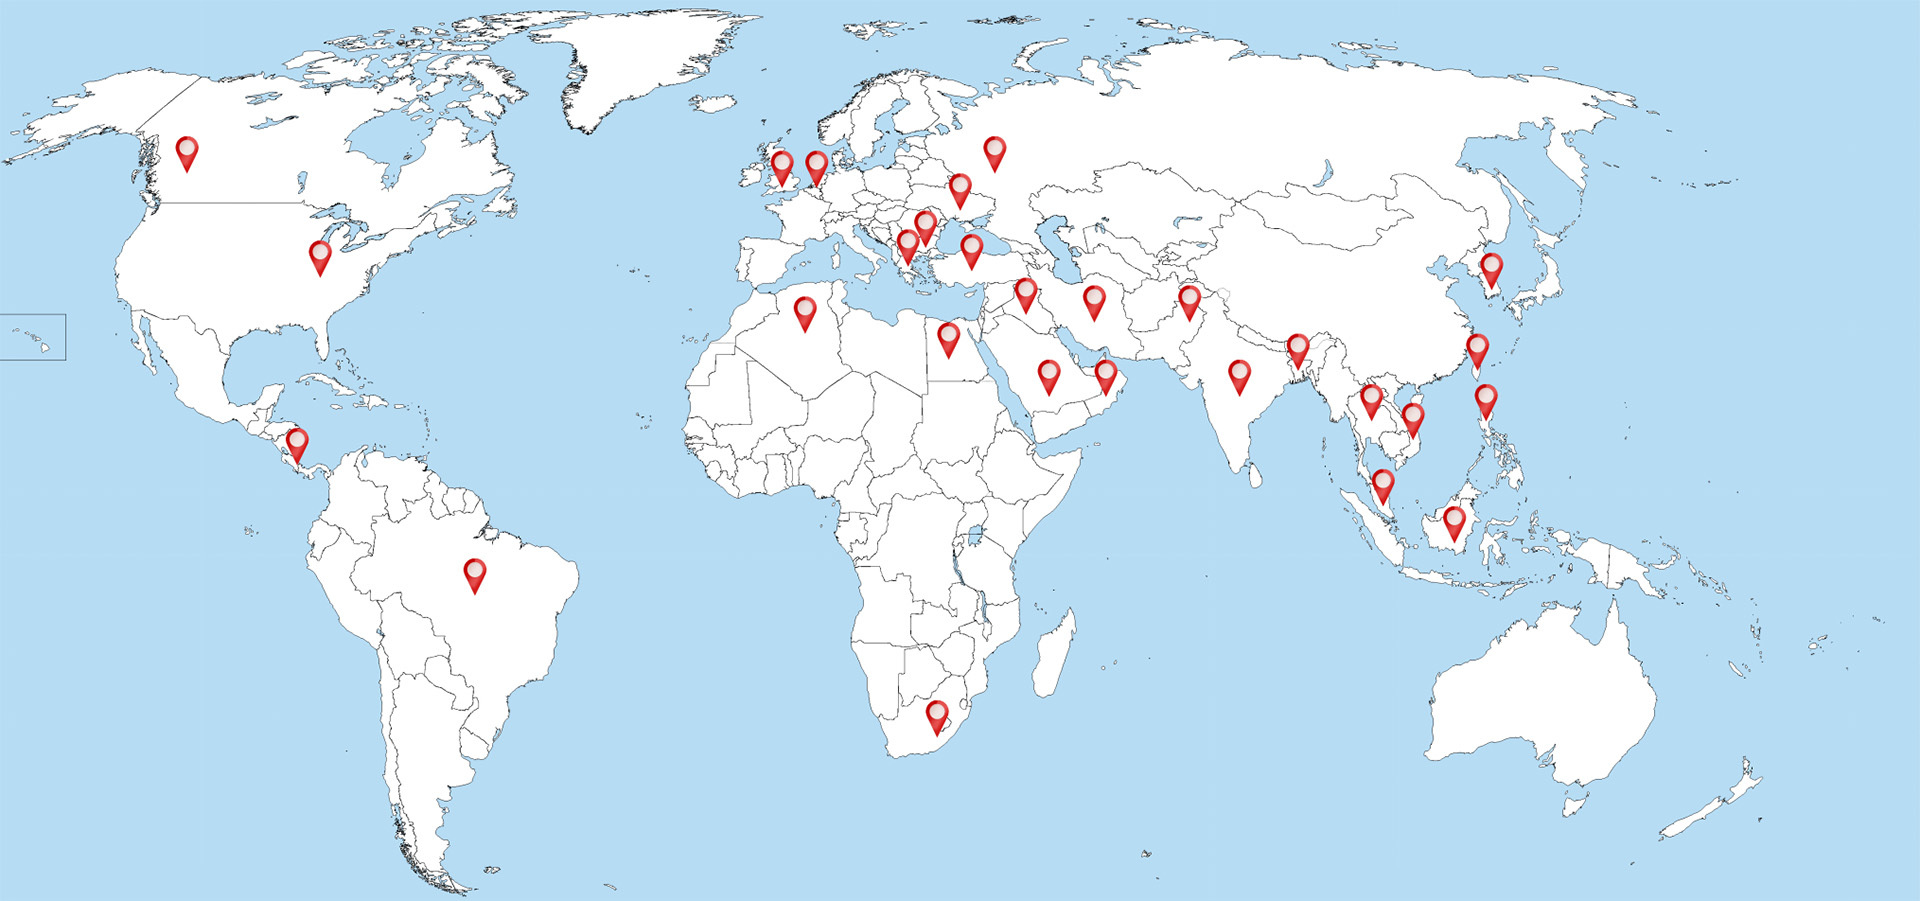 OUR CUSTOMERS ARE LOCATED ALL OVER THE WORLD